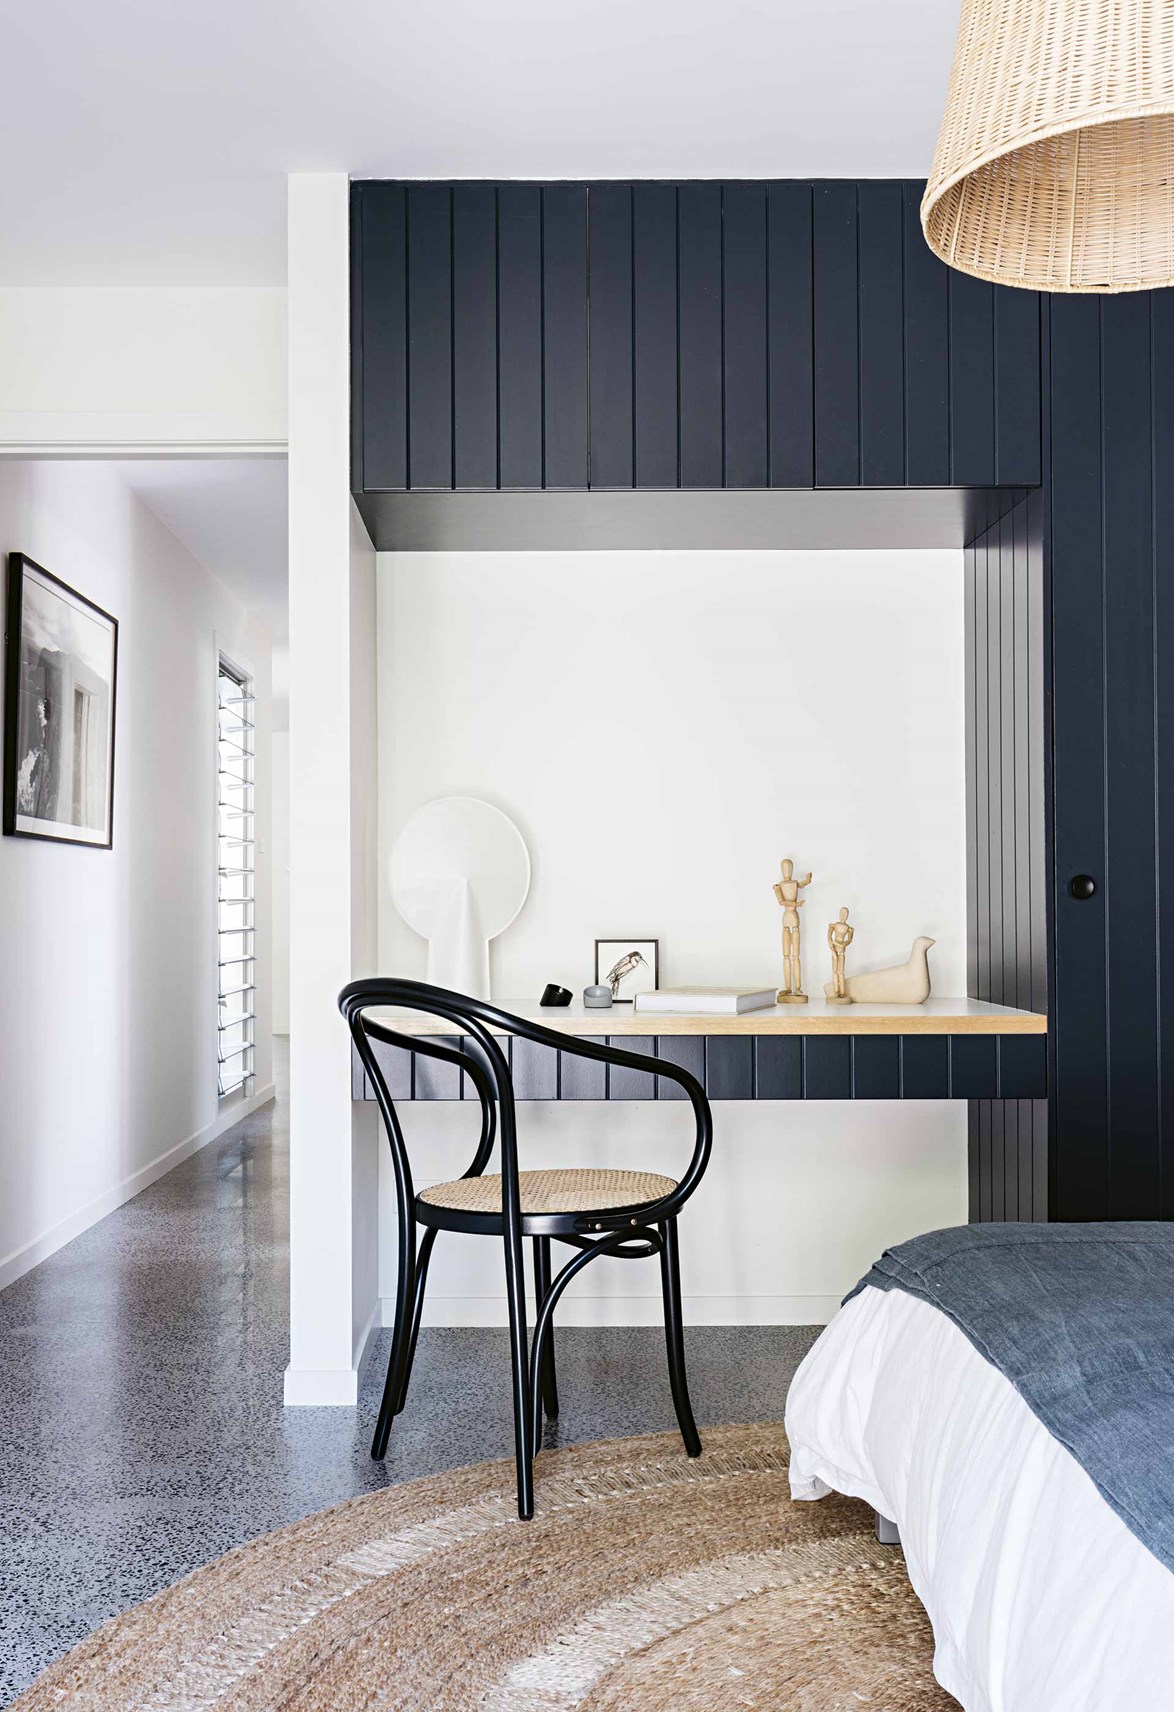 <p>**TO TRANSFORM A WARDROBE INTO A WONDERFUL FEATURE**<p>
<p>A panelled wardrobe becomes a feature wall in its own right in this [coastal home on McMaster's Beach](https://www.homestolove.com.au/macmasters-beach-house-18226|target="_blank"). Here, part of the wardrobe has been carved out as a study nook. Workinng alongside [Arent & Pyke](https://www.homestolove.com.au/colourful-california-bungalow-by-arent-and-pyke-4946|target="_blank") , the owners chose to adopt timber cladding throughout the home in reference to the other 1950s weatherboard homes in the neighbourhood.<p>
<P>*Photo: Felix Forest / Story: Inside Out*<P>